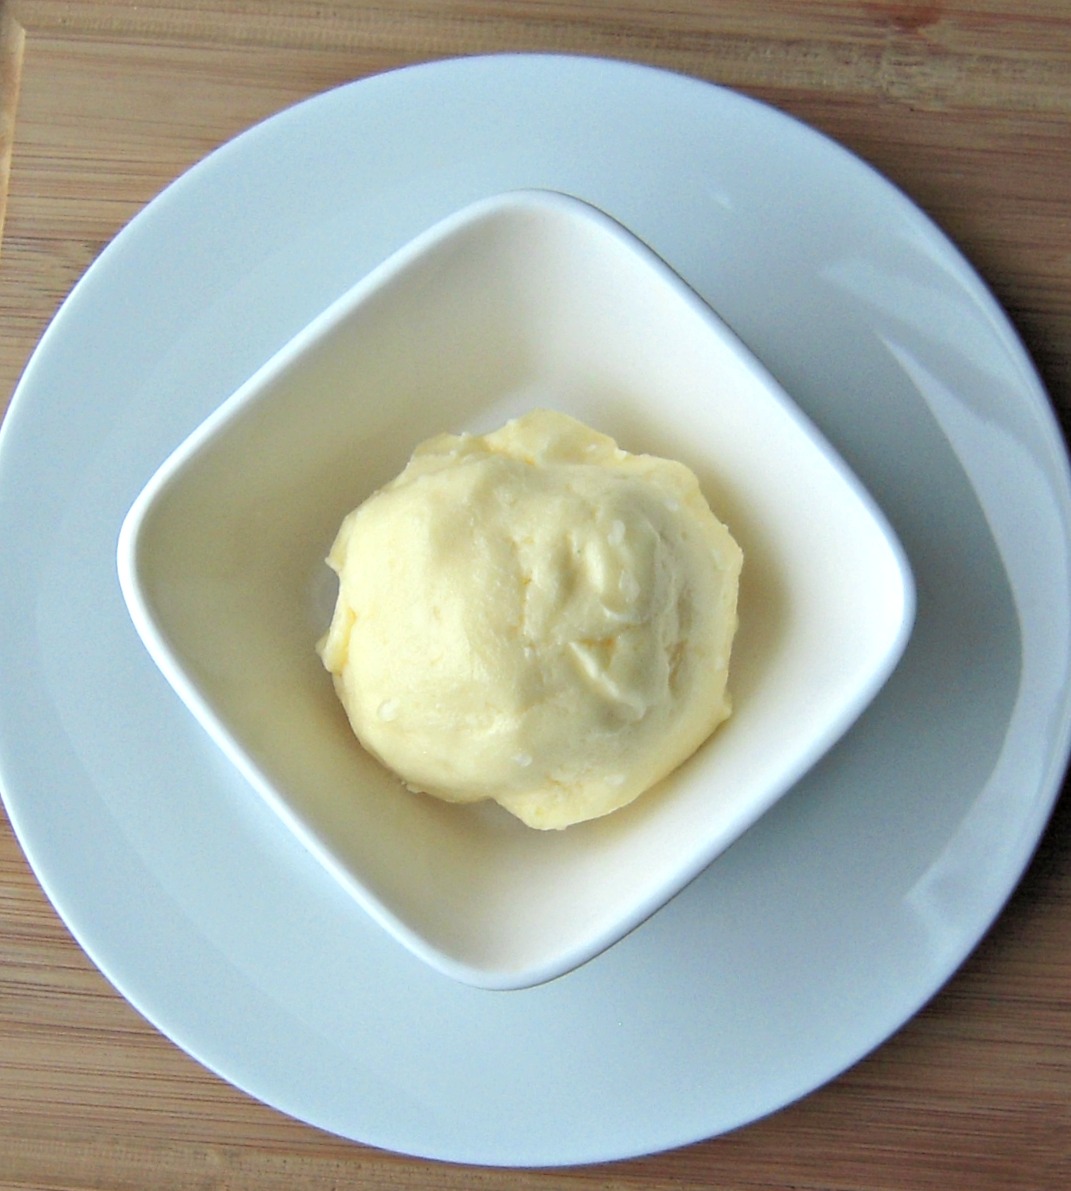 Home  Cream Butter Make at how make How to At cream butter To with Pages: From home Jyoti's